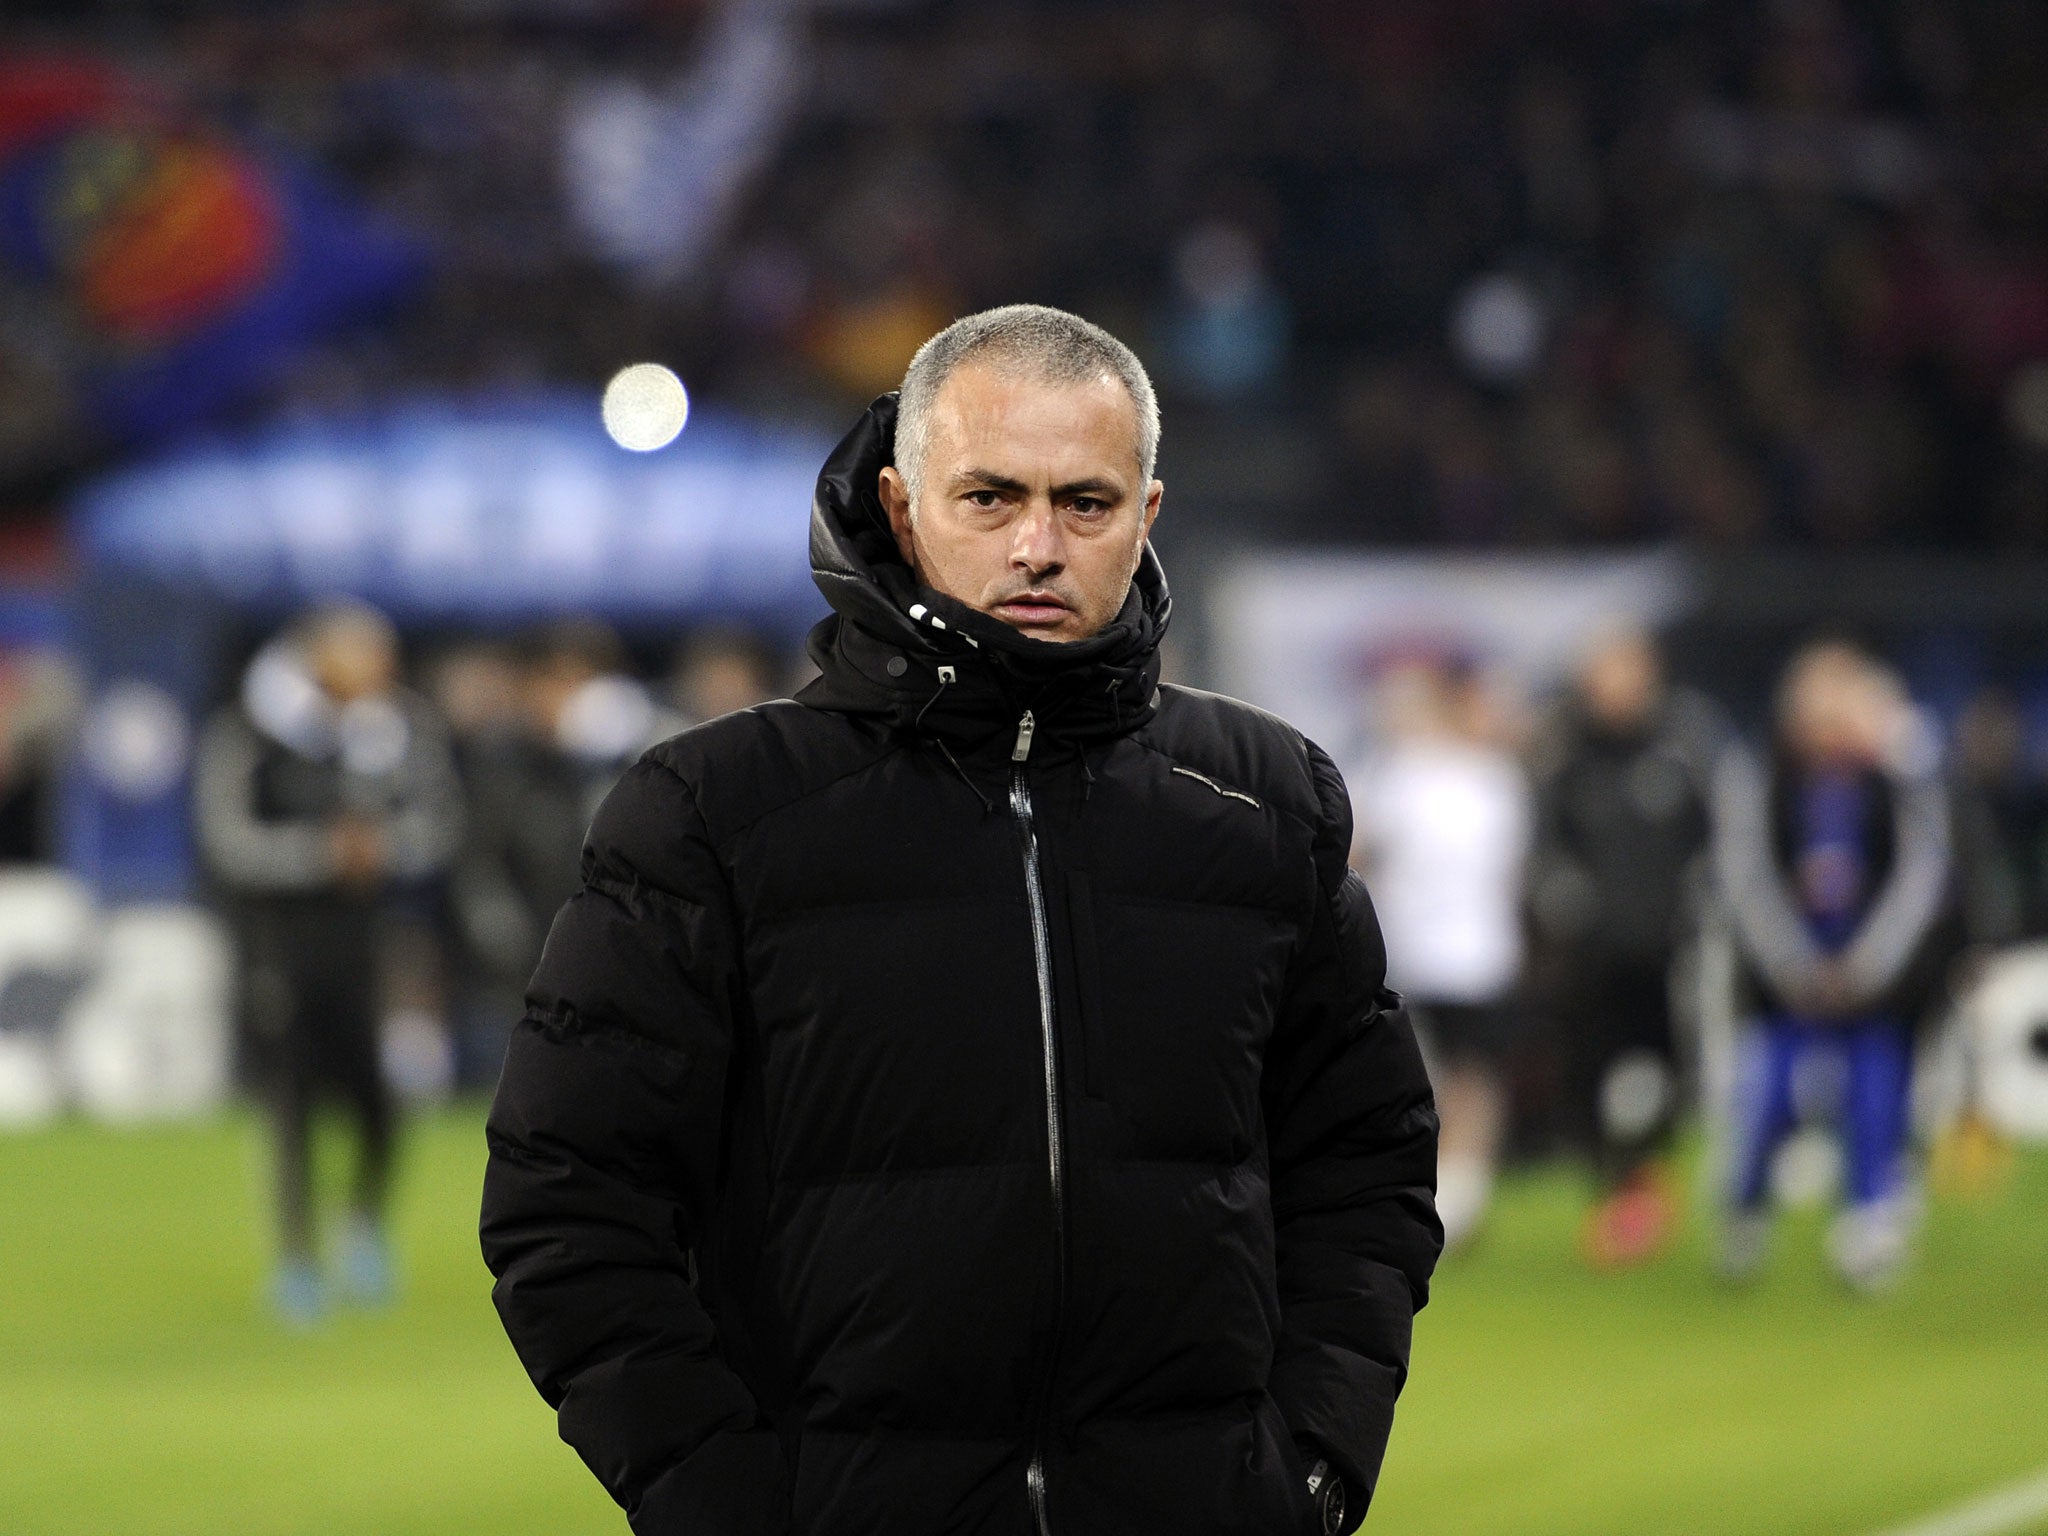 Jose Mourinho leaves the St Jakob-Park pitch after Chelsea's 1-0 defeat to Basle